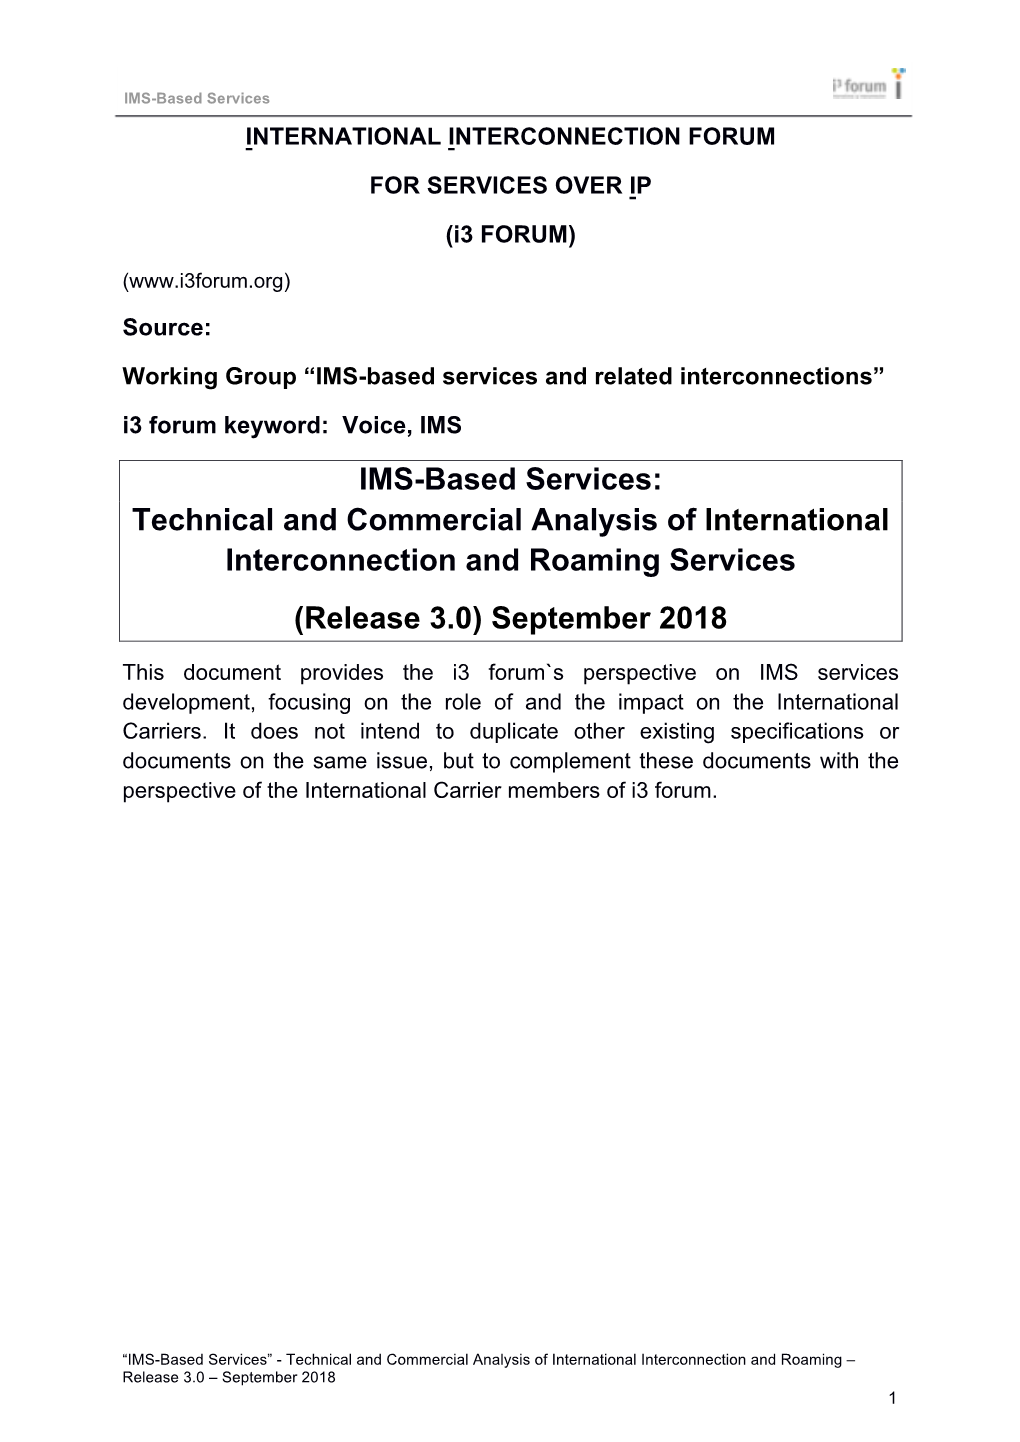 IMS-Based Services: Technical and Commercial Analysis of International Interconnection and Roaming Services (Release 3.0) September 2018